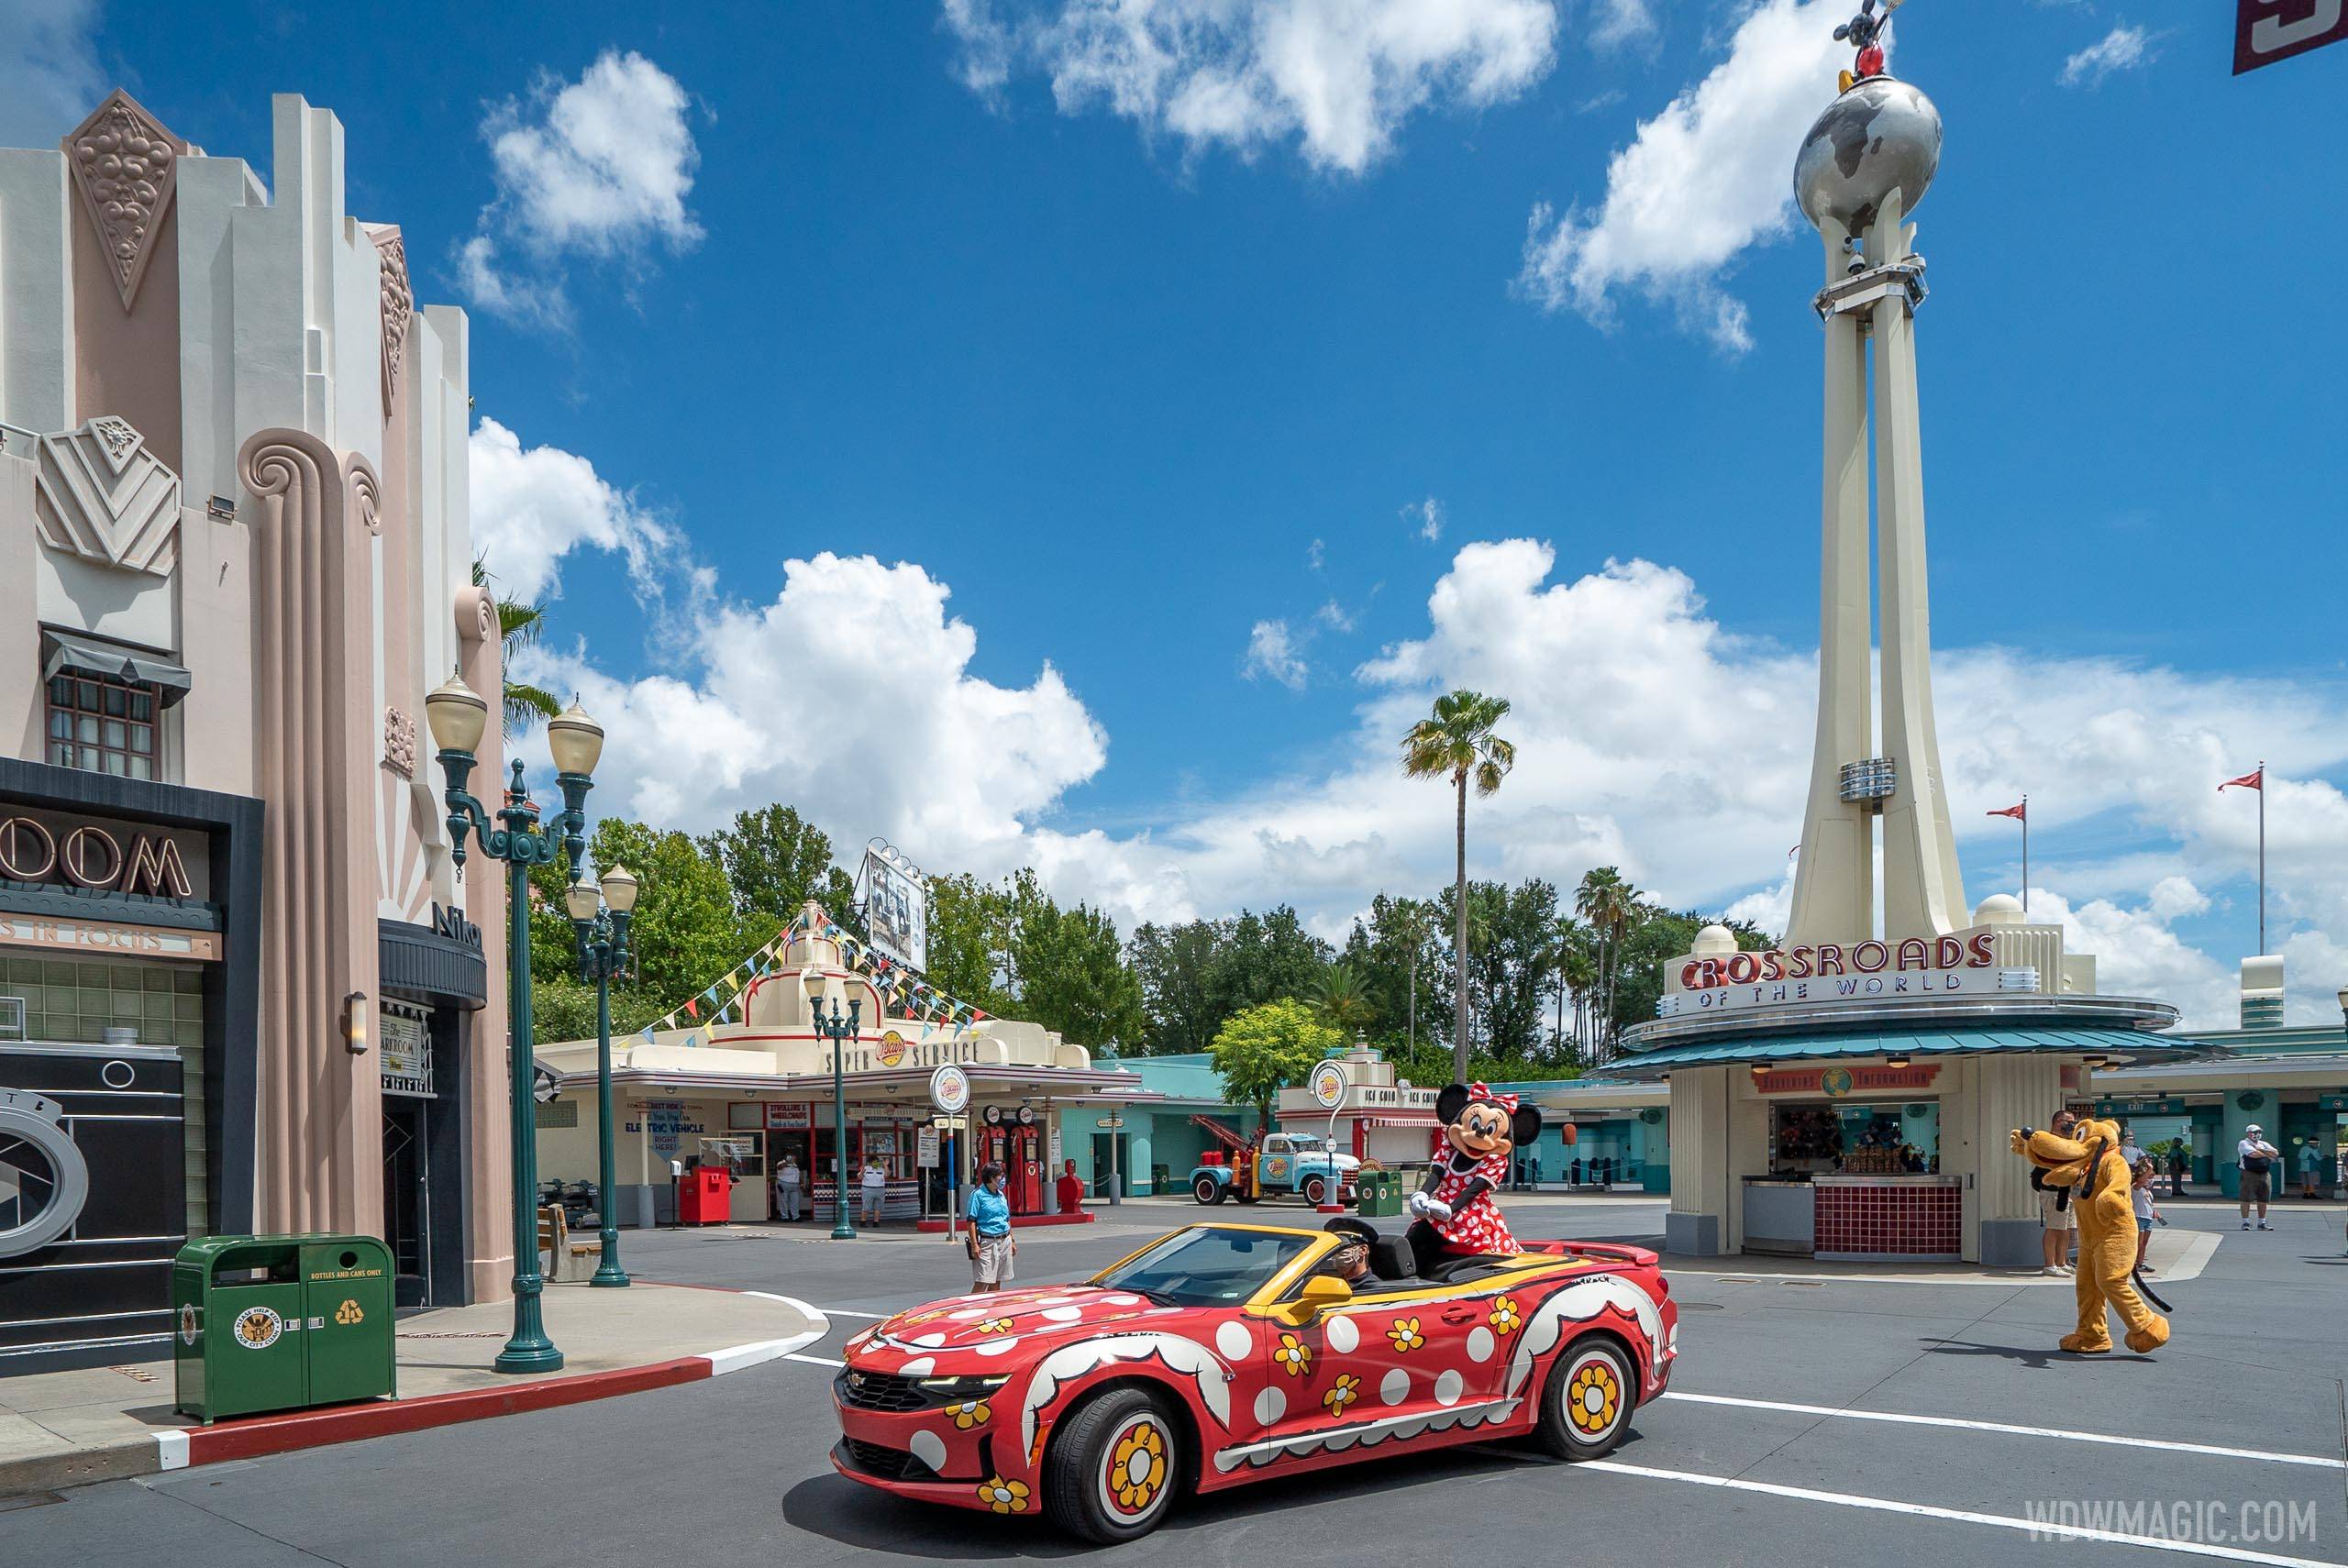 New entertainment offerings require just a handful of Cast Members per day